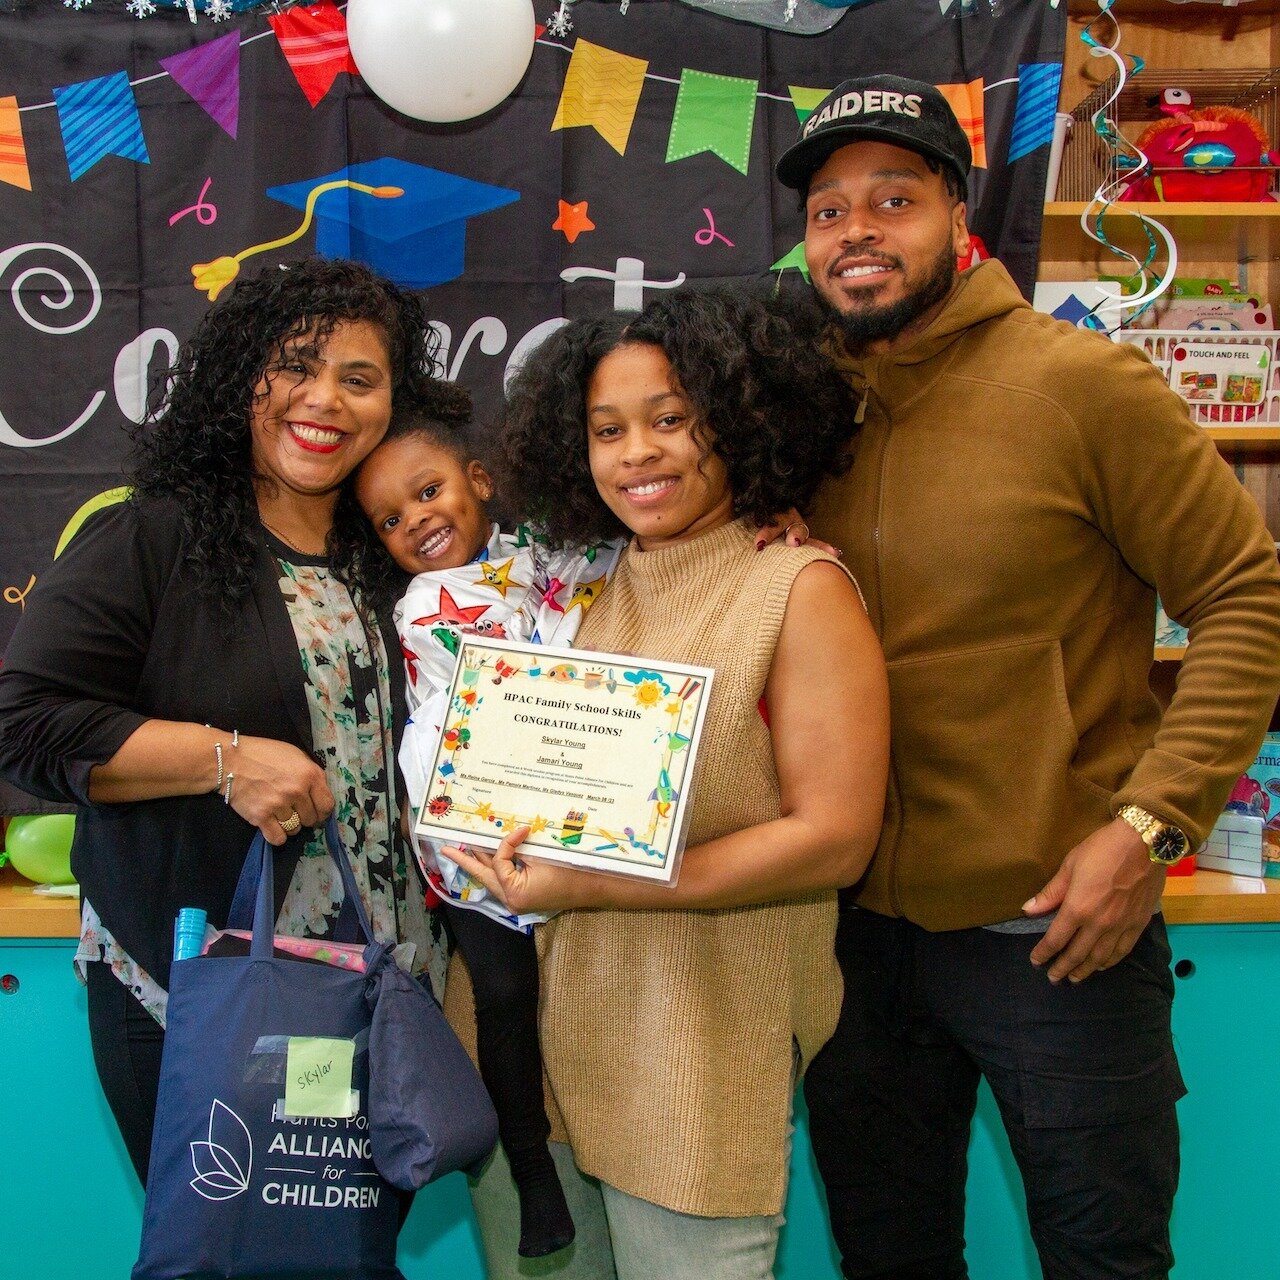 Congratulations to all our recent Familly School Skills Graduates! We are so proud of all the progress and joy we got to experience with these families in our 2023 Winter session. 

Our Family School Skills program simultaneously provides an opportun